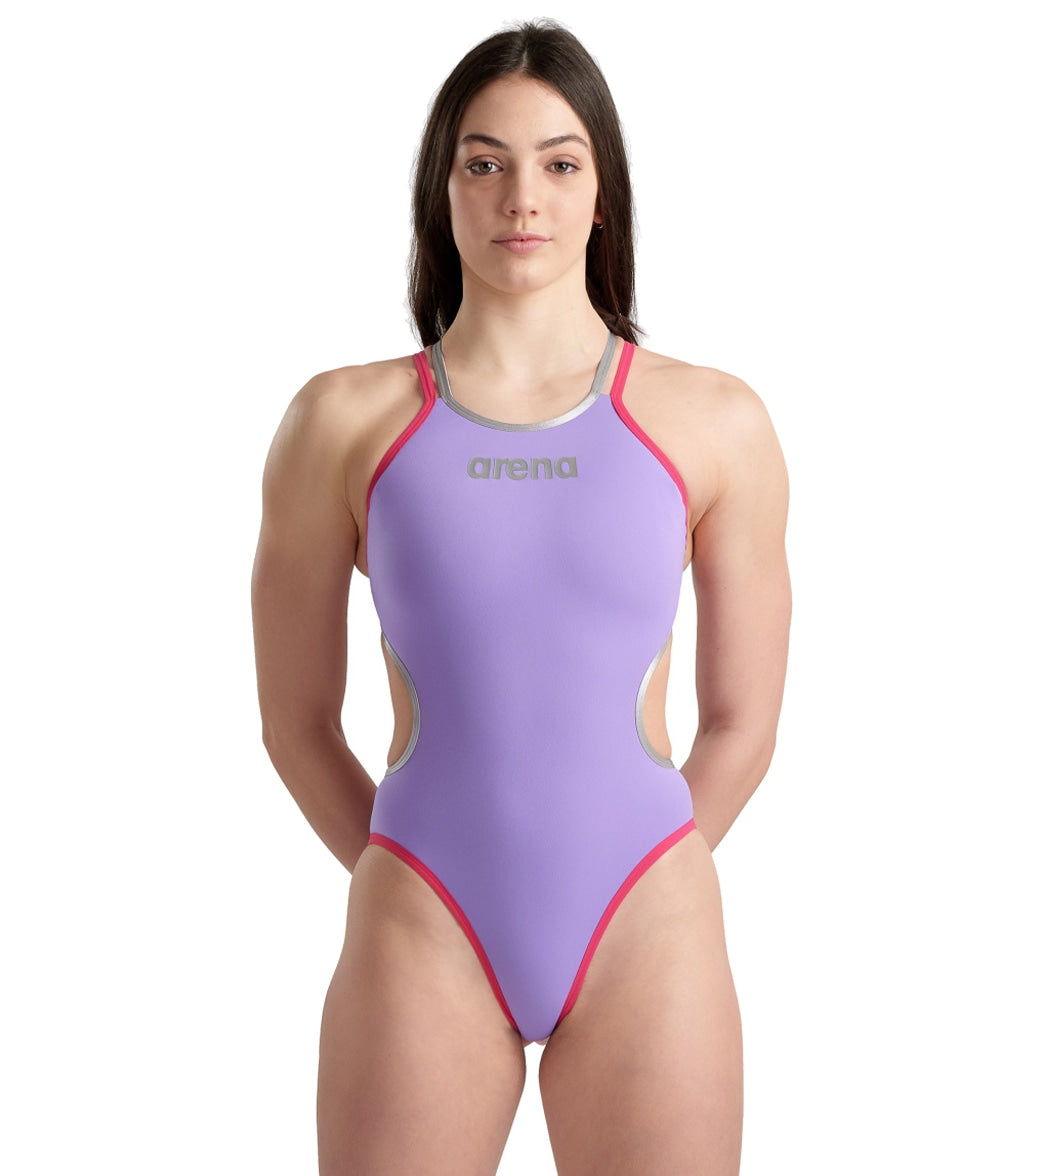 Arena Womens One Double Cross Back One Piece Swimsuit